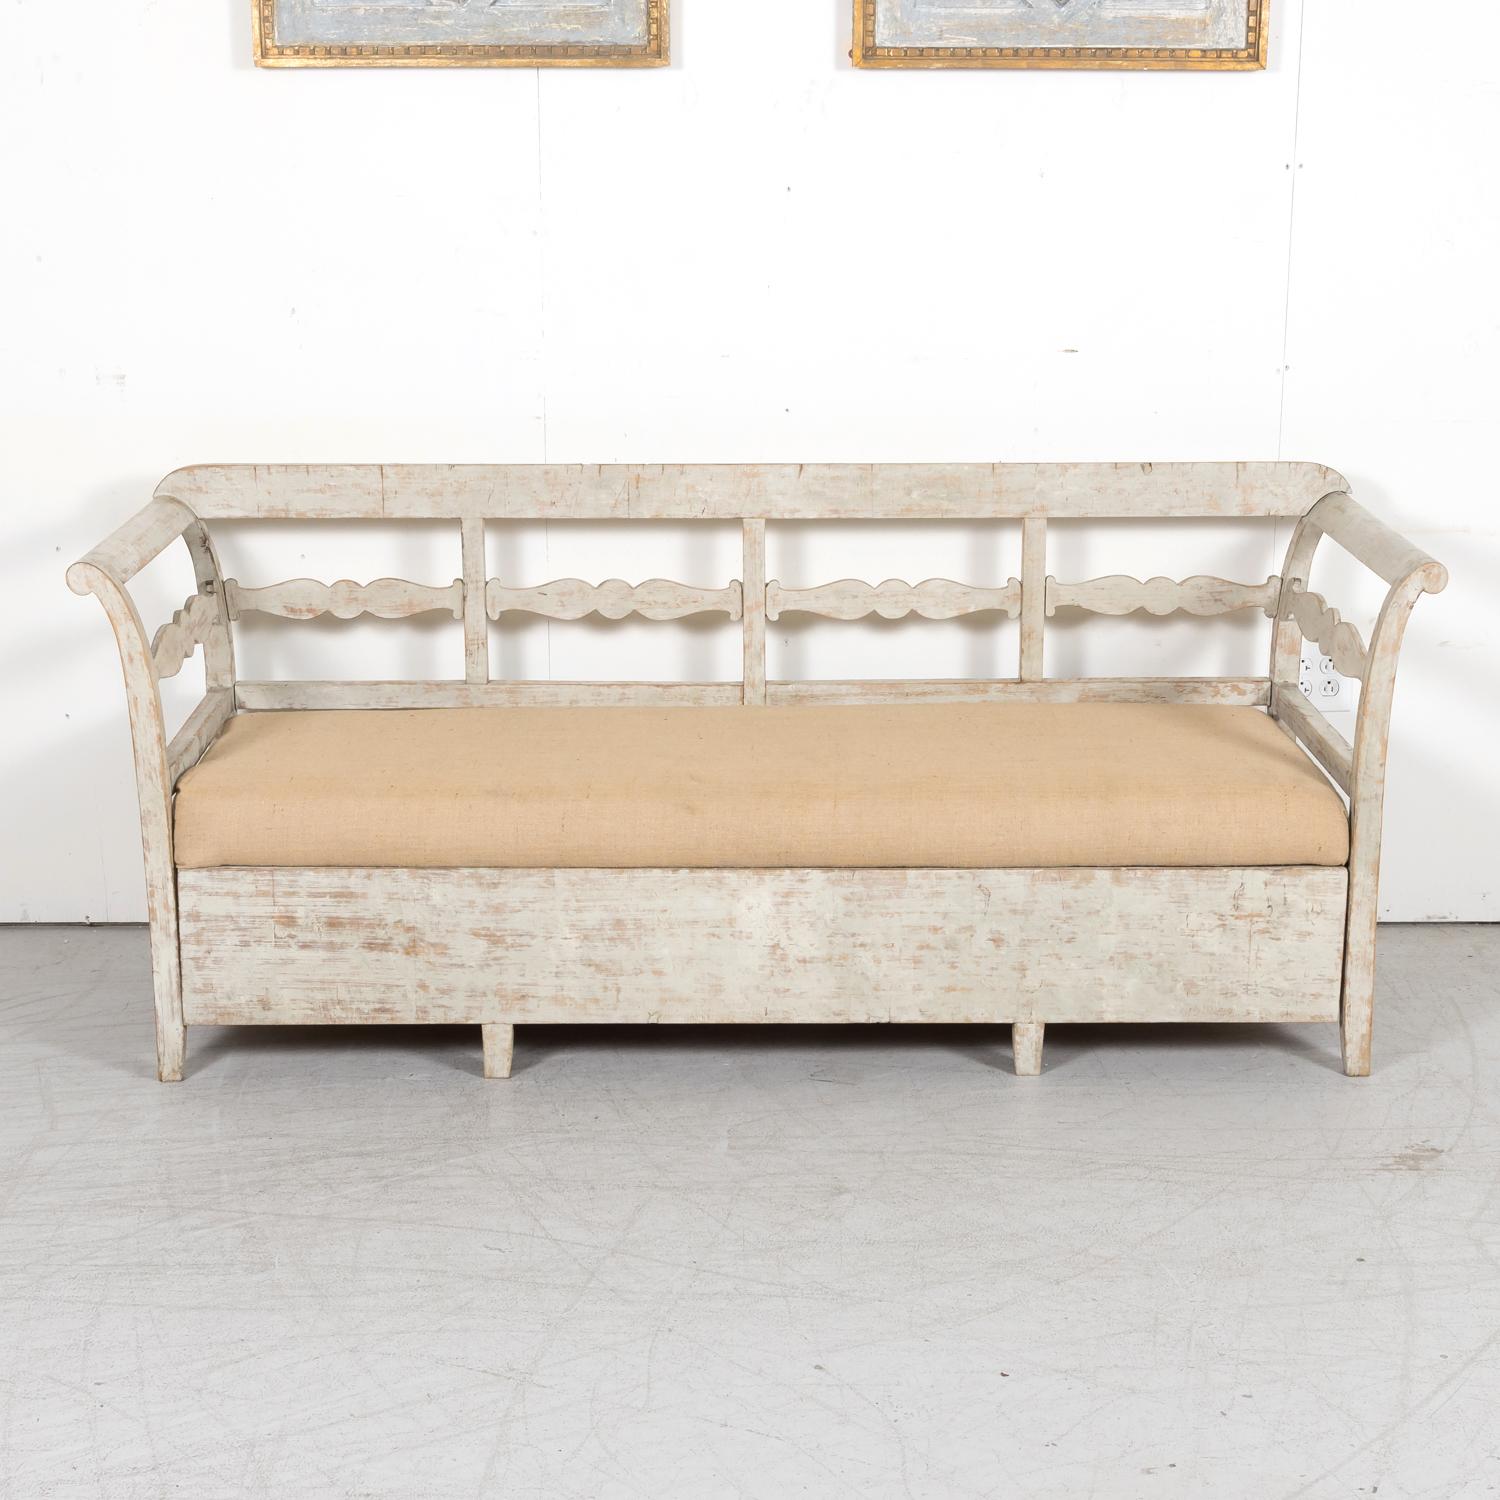 Hand-Painted 19th Century Painted Swedish Bench with Trundle Bed